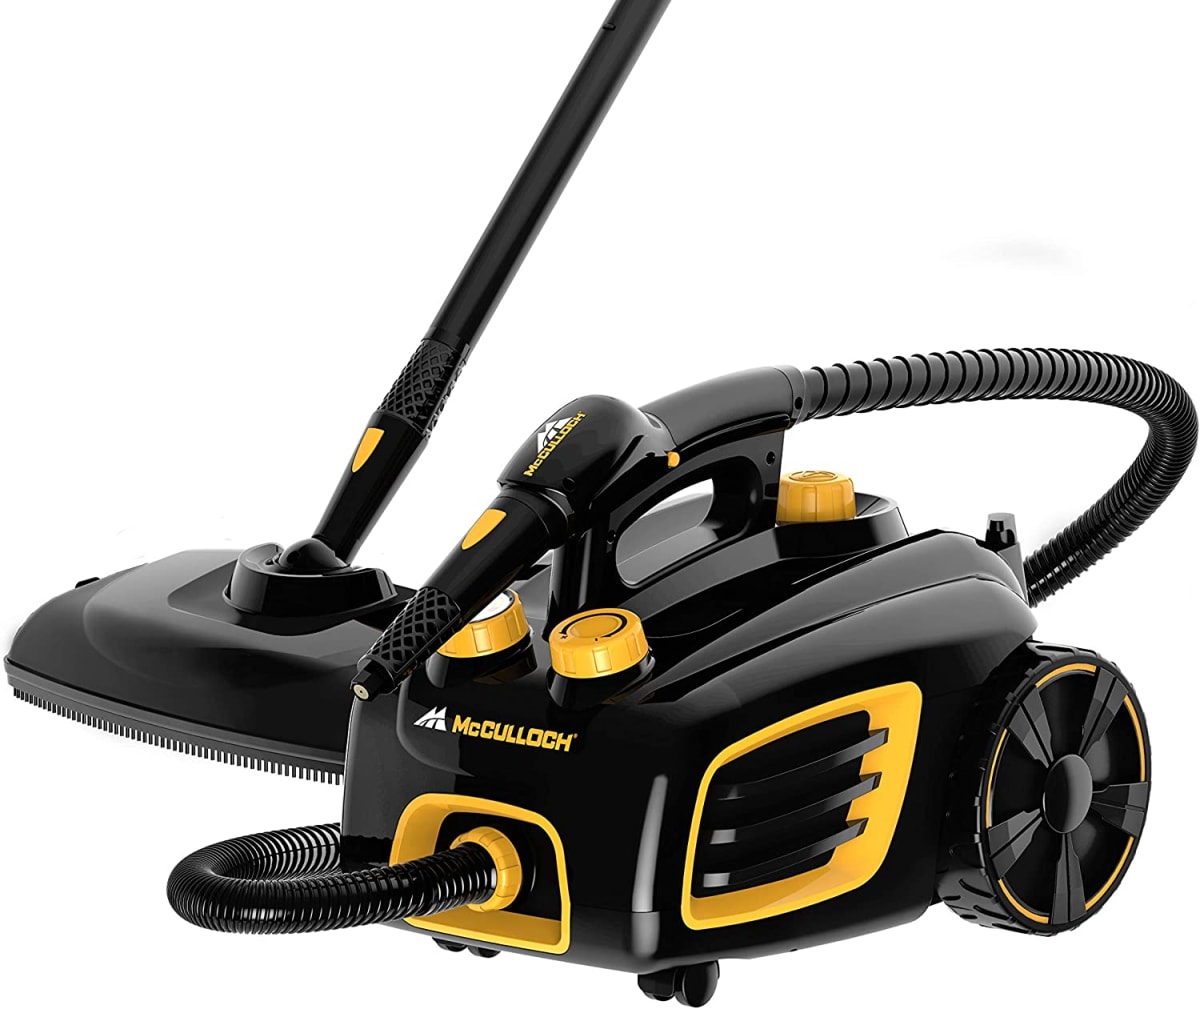 McCulloch MC1375 Canister Steam Cleaner